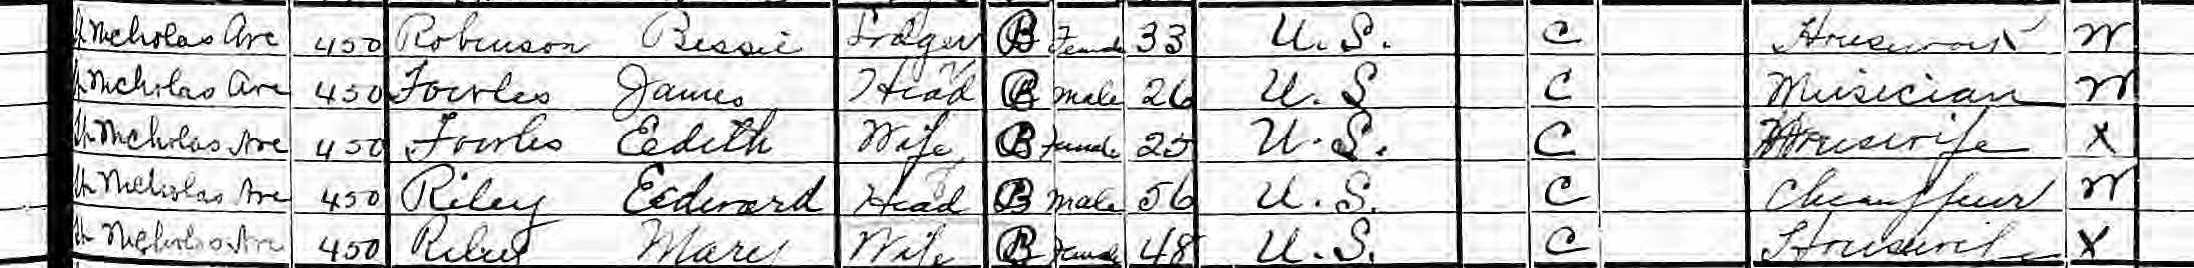 James and Edith Fowler in 1925 NY State Census